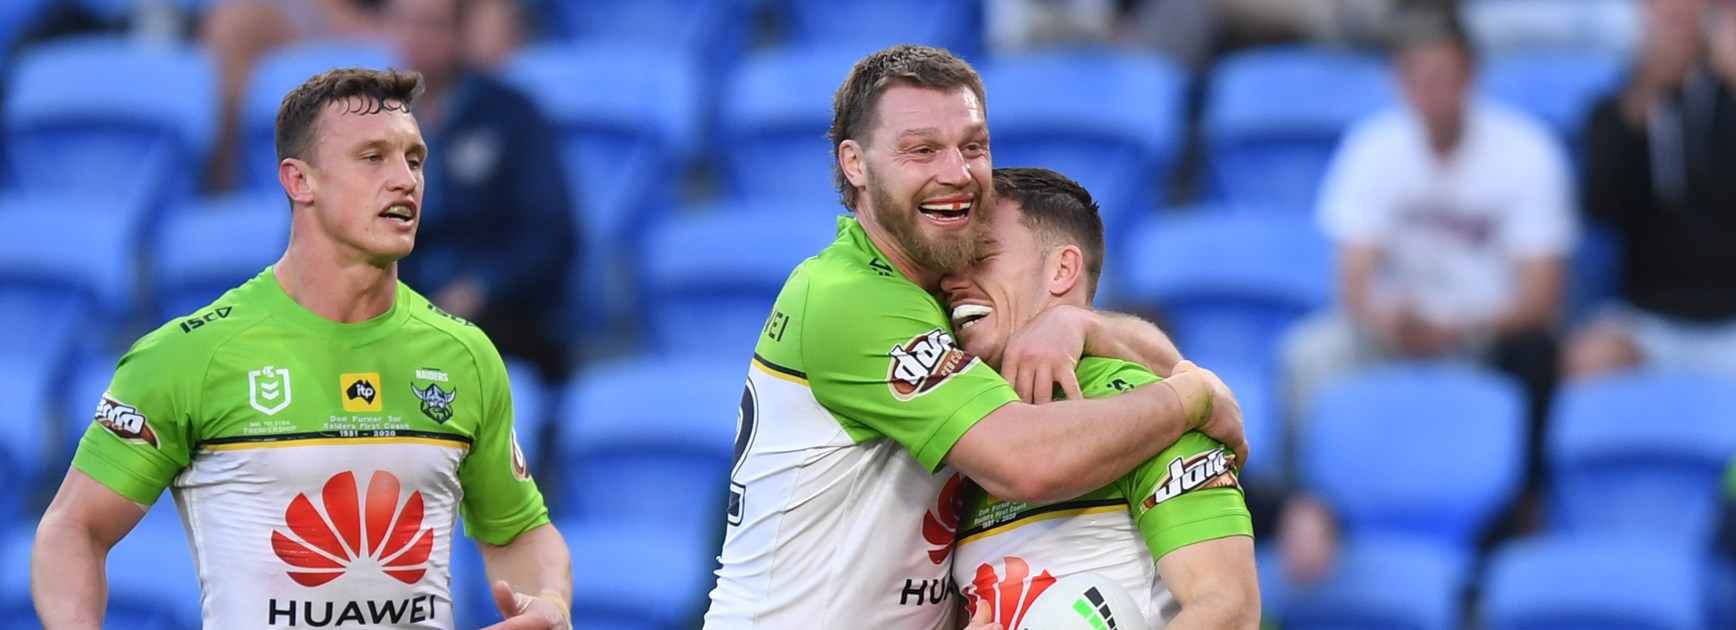 NRL Match Report: Raiders complete Queensland Clean Sweep with big win